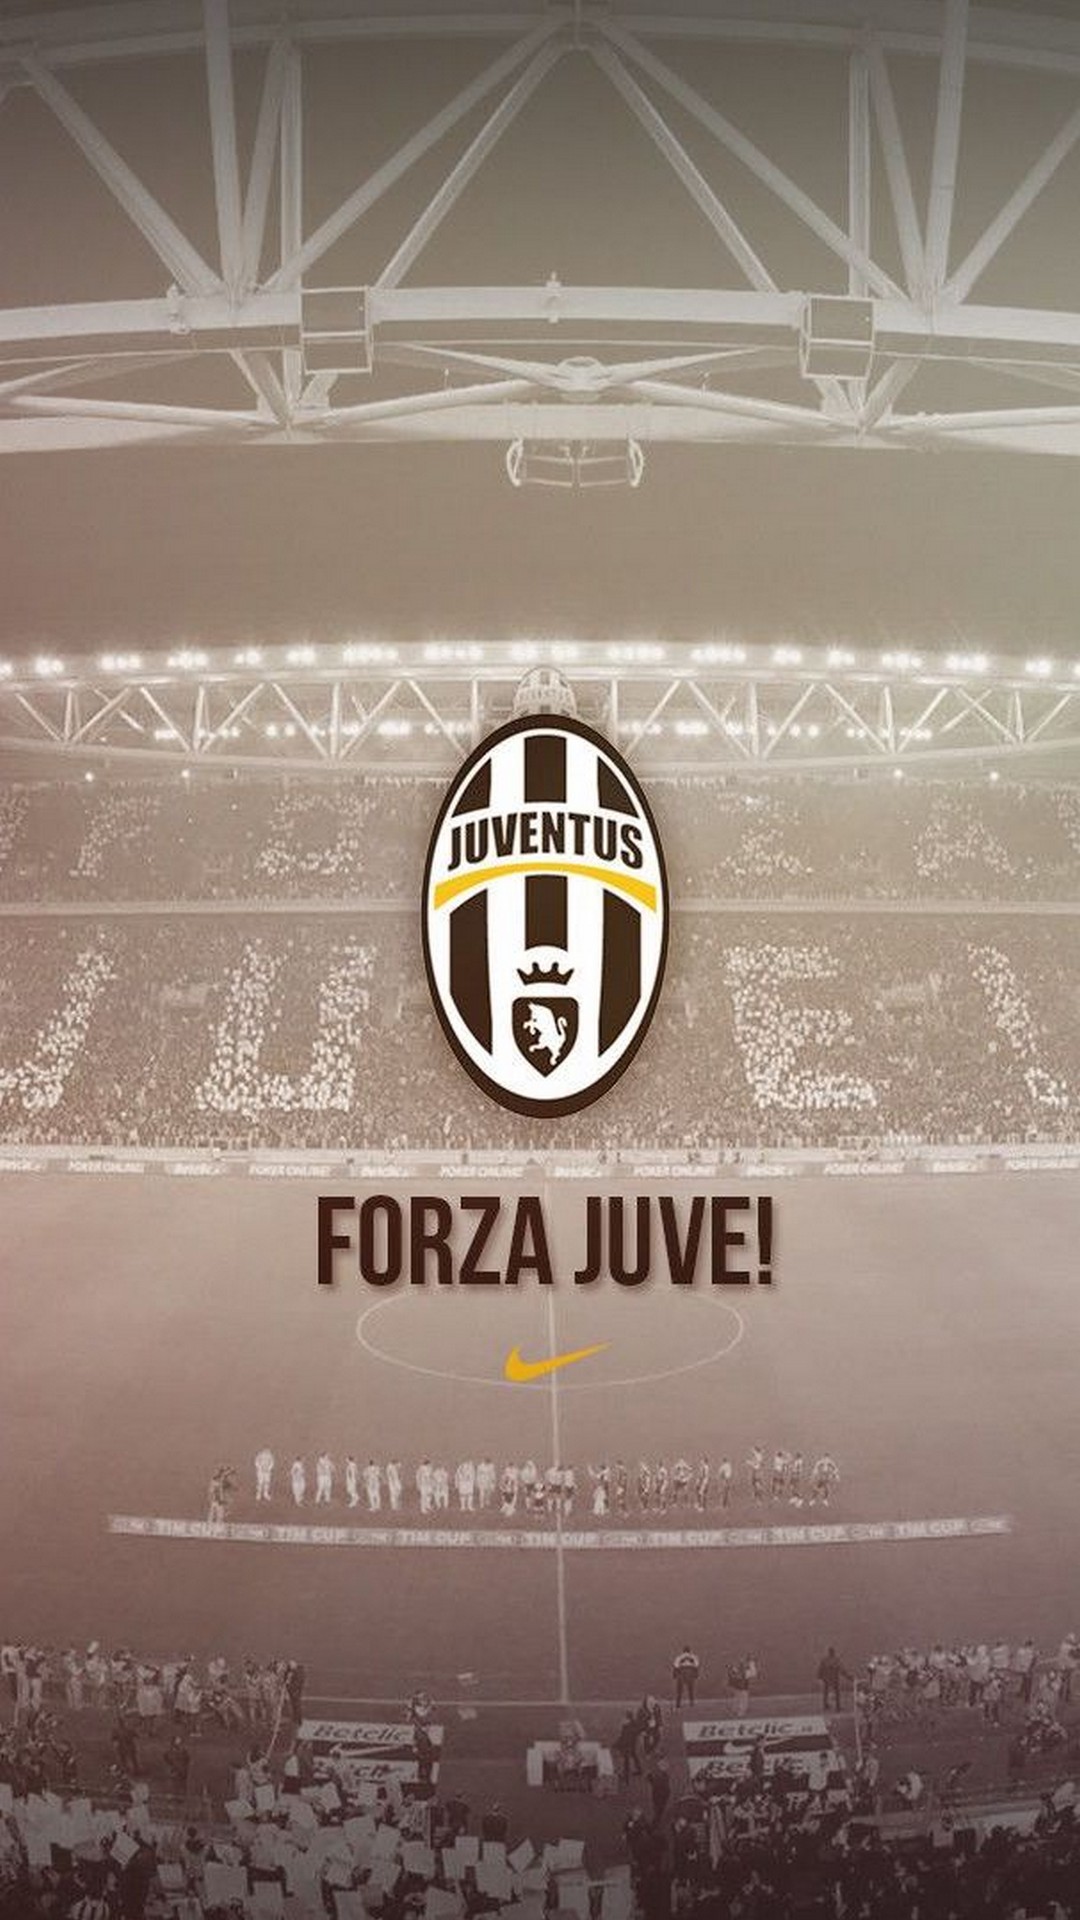 Forza Juve Wallpaper For iPhone resolution 1080x1920